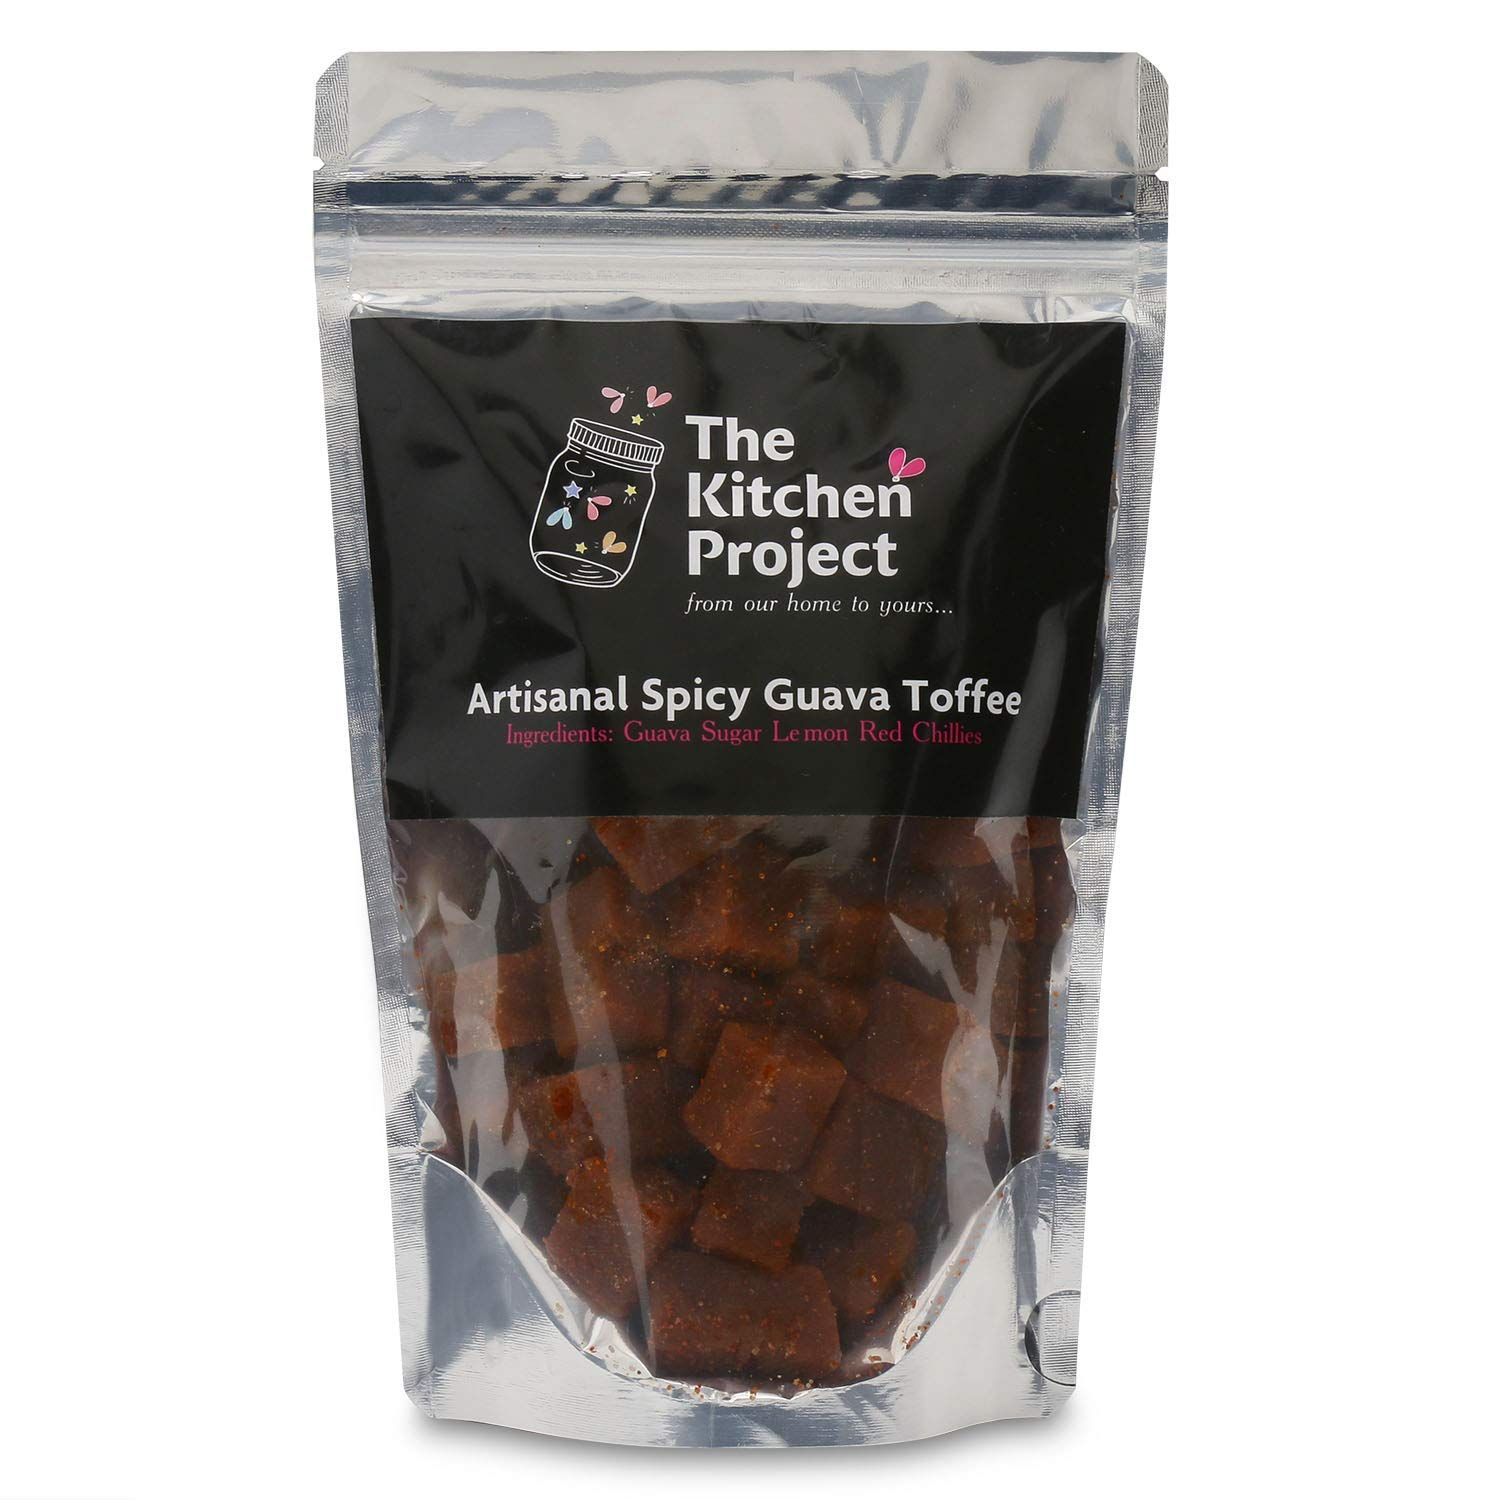 The Kitchen Project Artisanal Spicy Guava Toffee Image